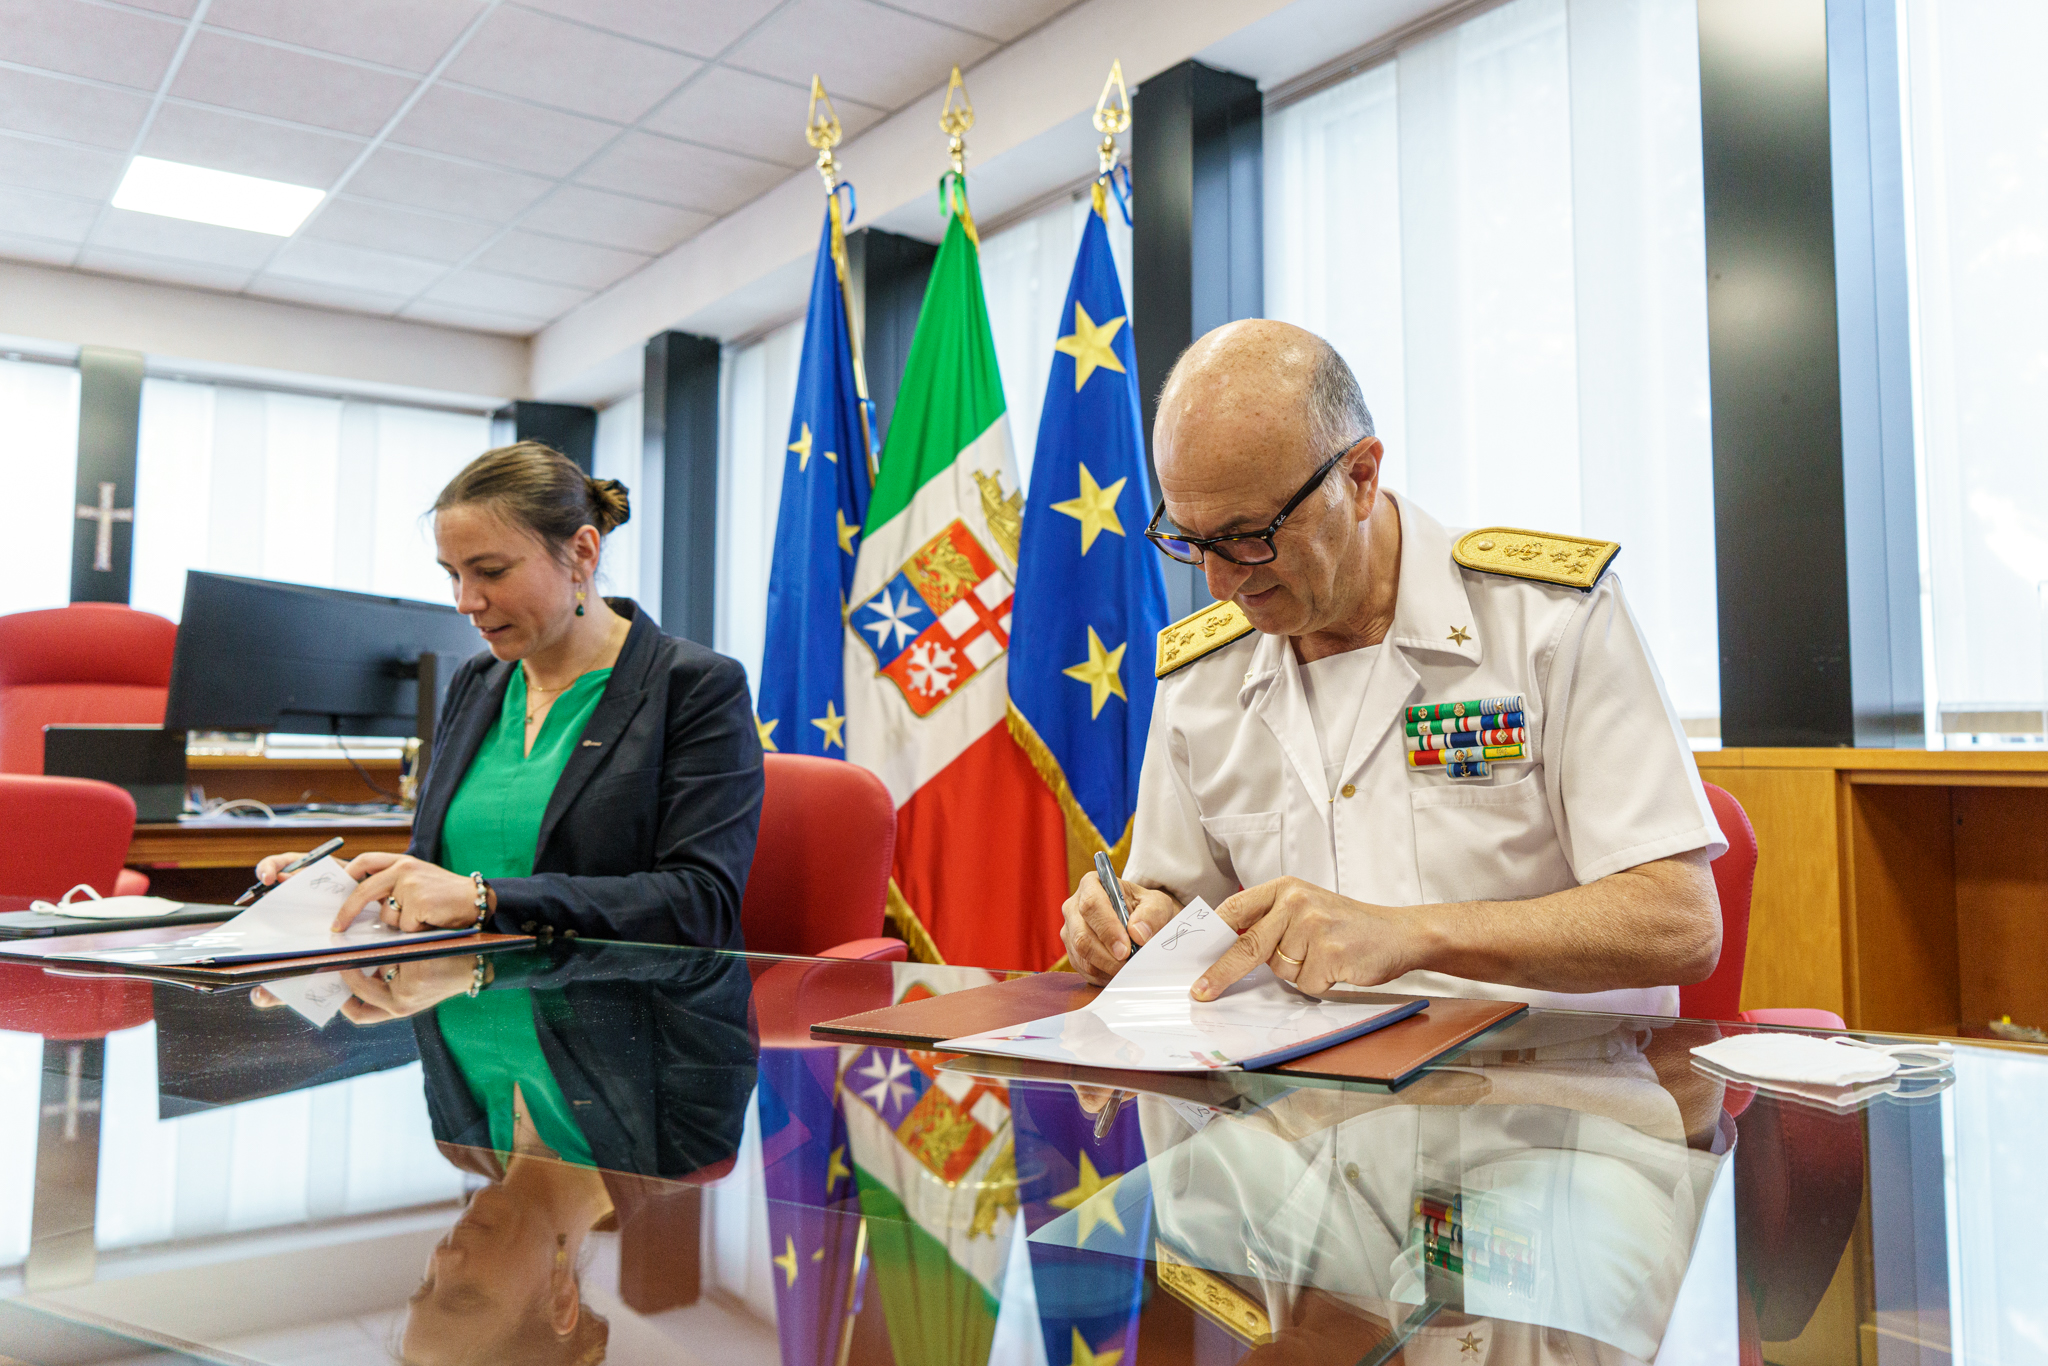 Signing of the MOI byCommander General Admiral Chief Inspector Nicola Carlone of the ITCG and Elodie Viau, ESA Director of Telecommunications and Integrated Applications (TIA)